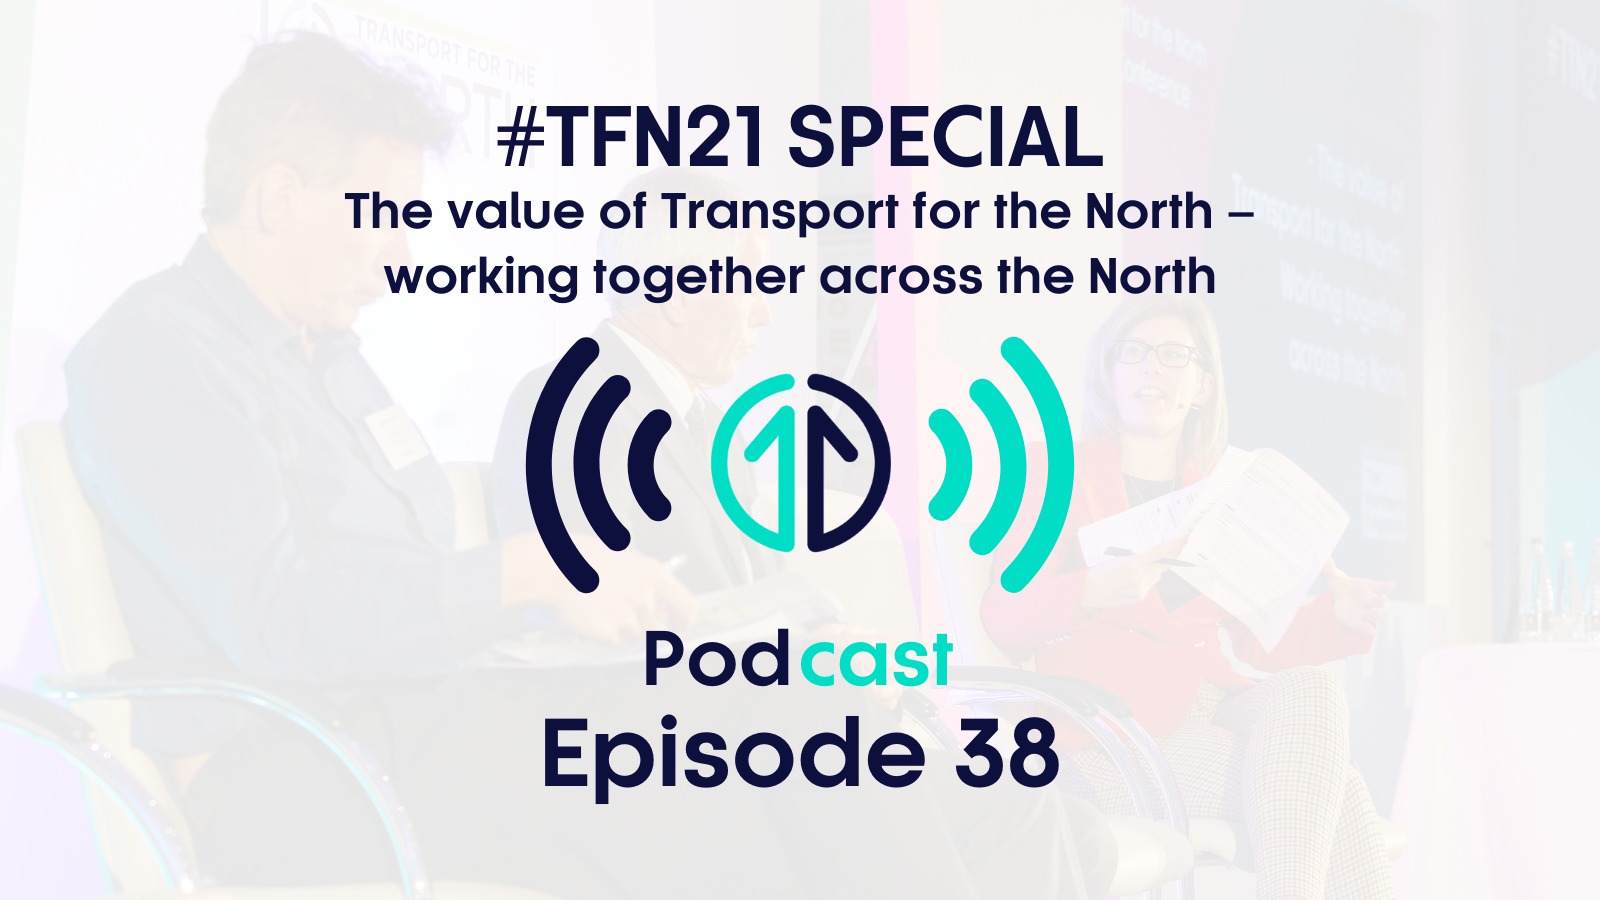 #TfN21 Annual Conference Special: Working together across the North | Episode 38